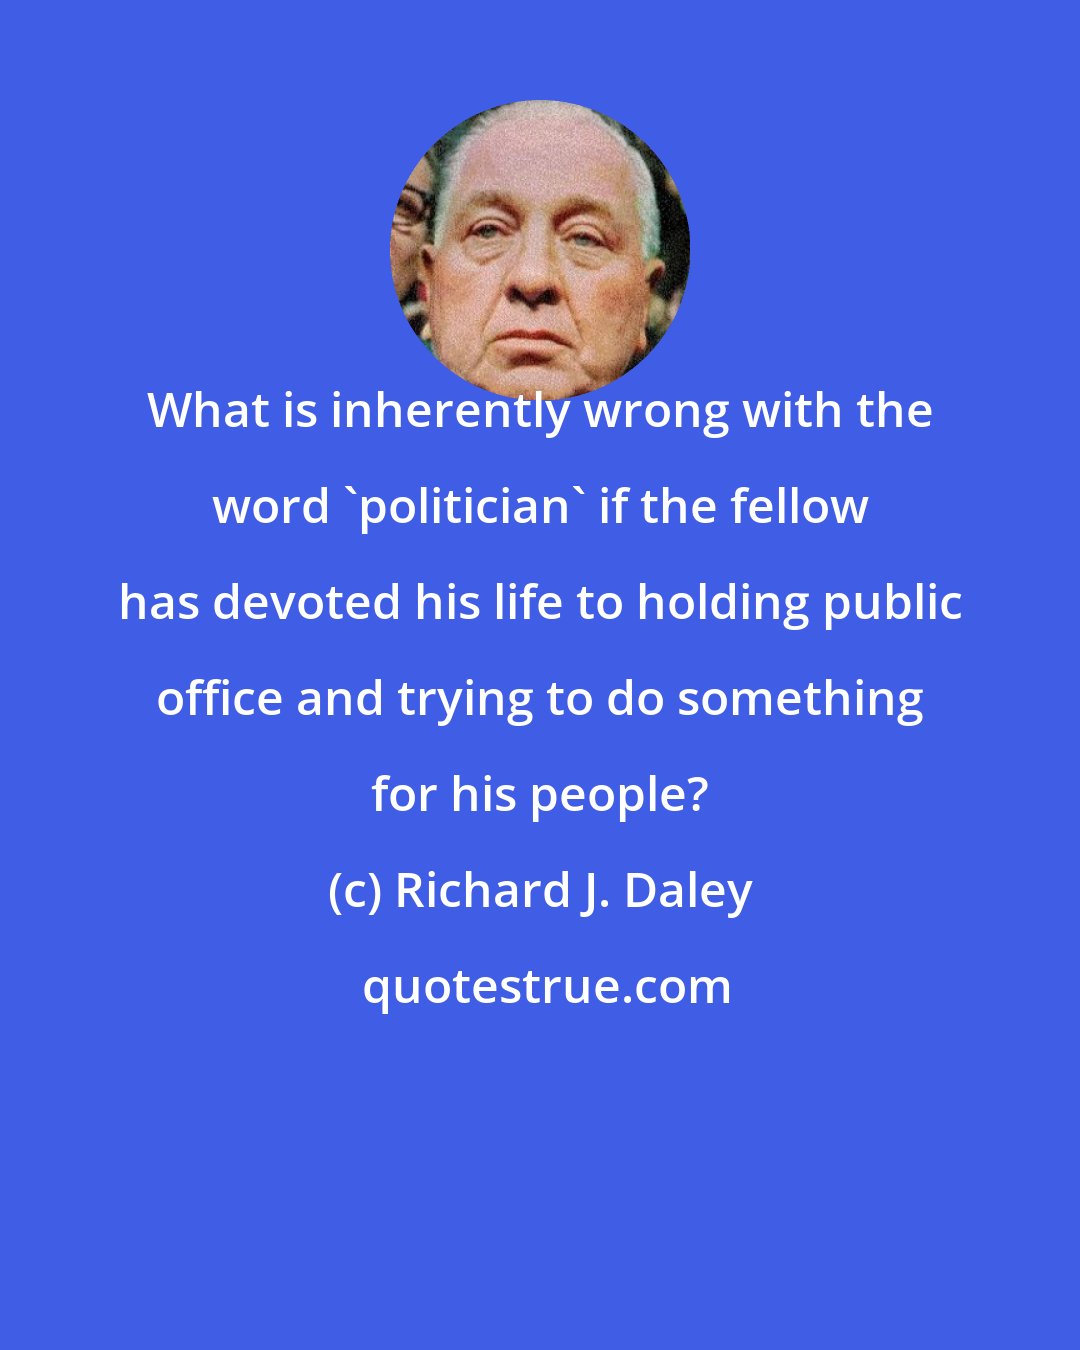 Richard J. Daley: What is inherently wrong with the word 'politician' if the fellow has devoted his life to holding public office and trying to do something for his people?